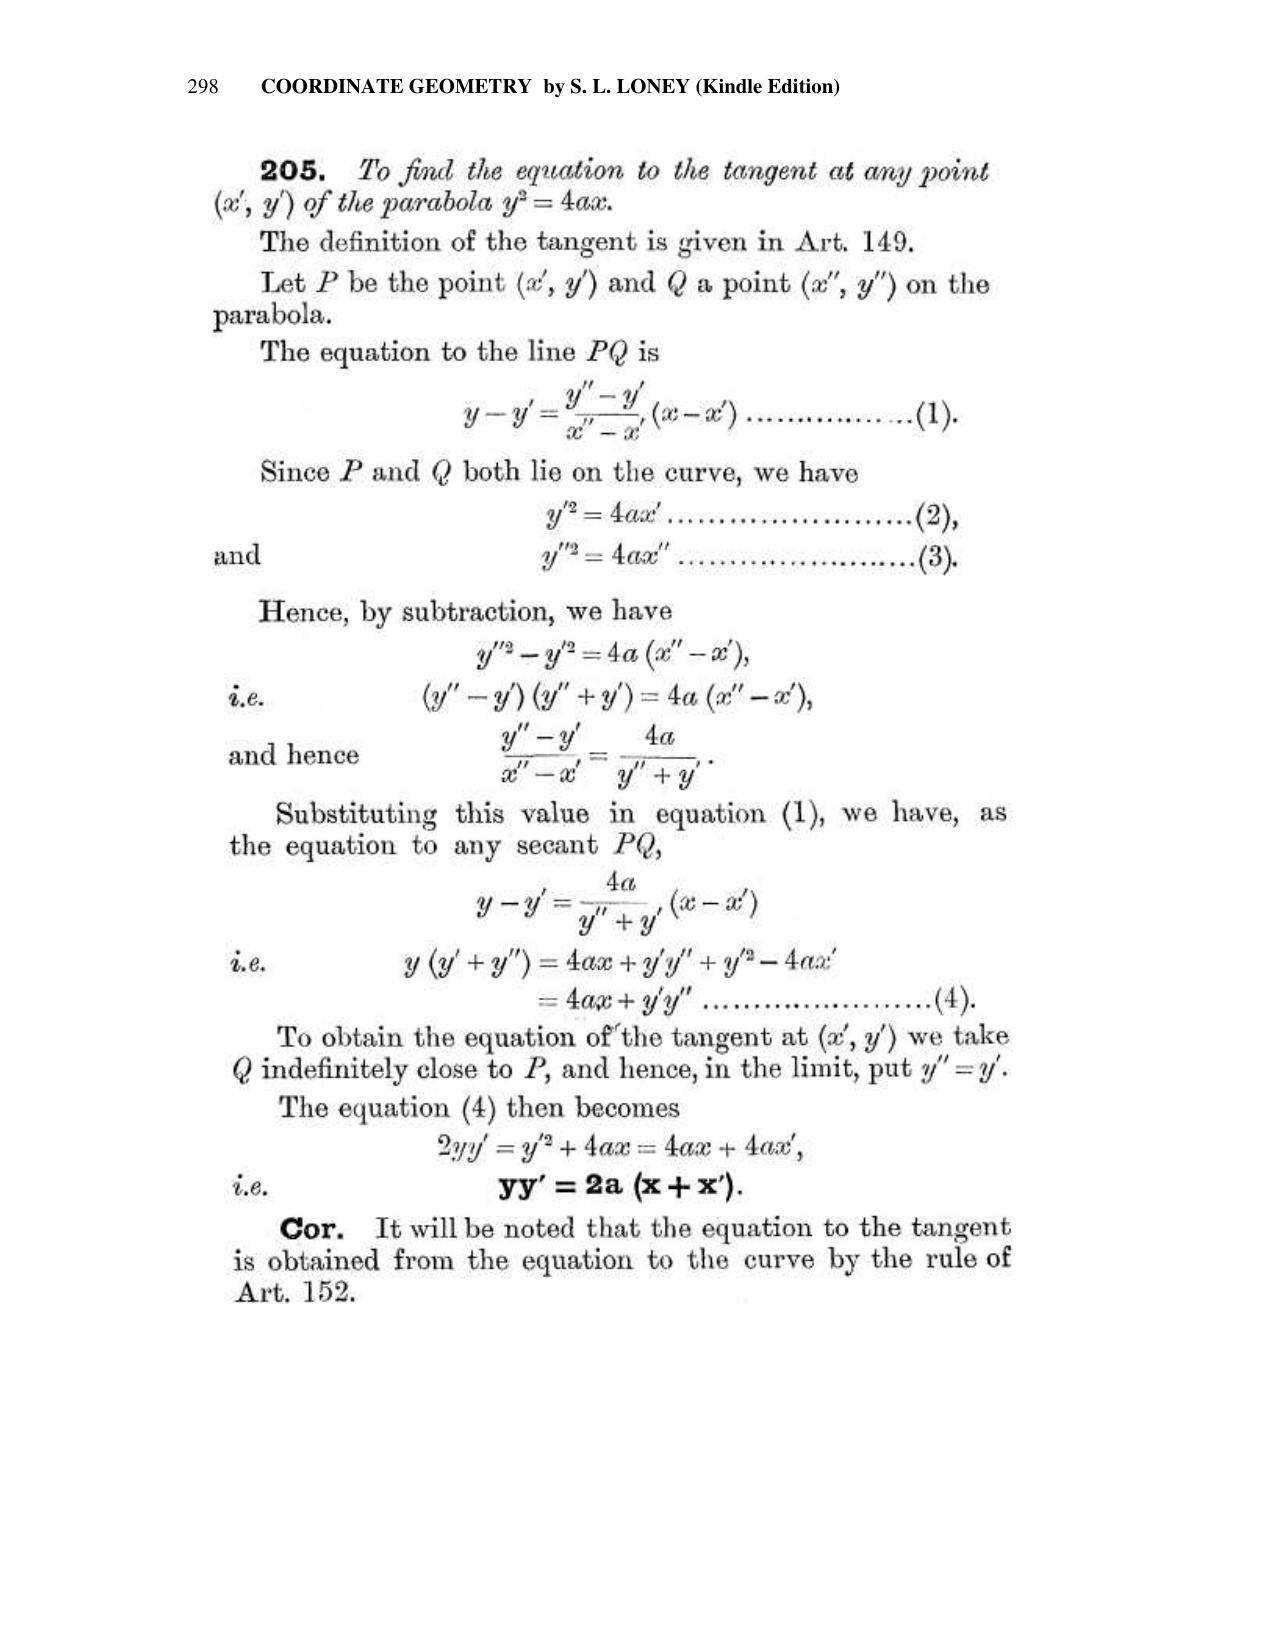 Chapter 10: The Parabola - SL Loney Solutions: The Elements of Coordinate Geometry - Page 12